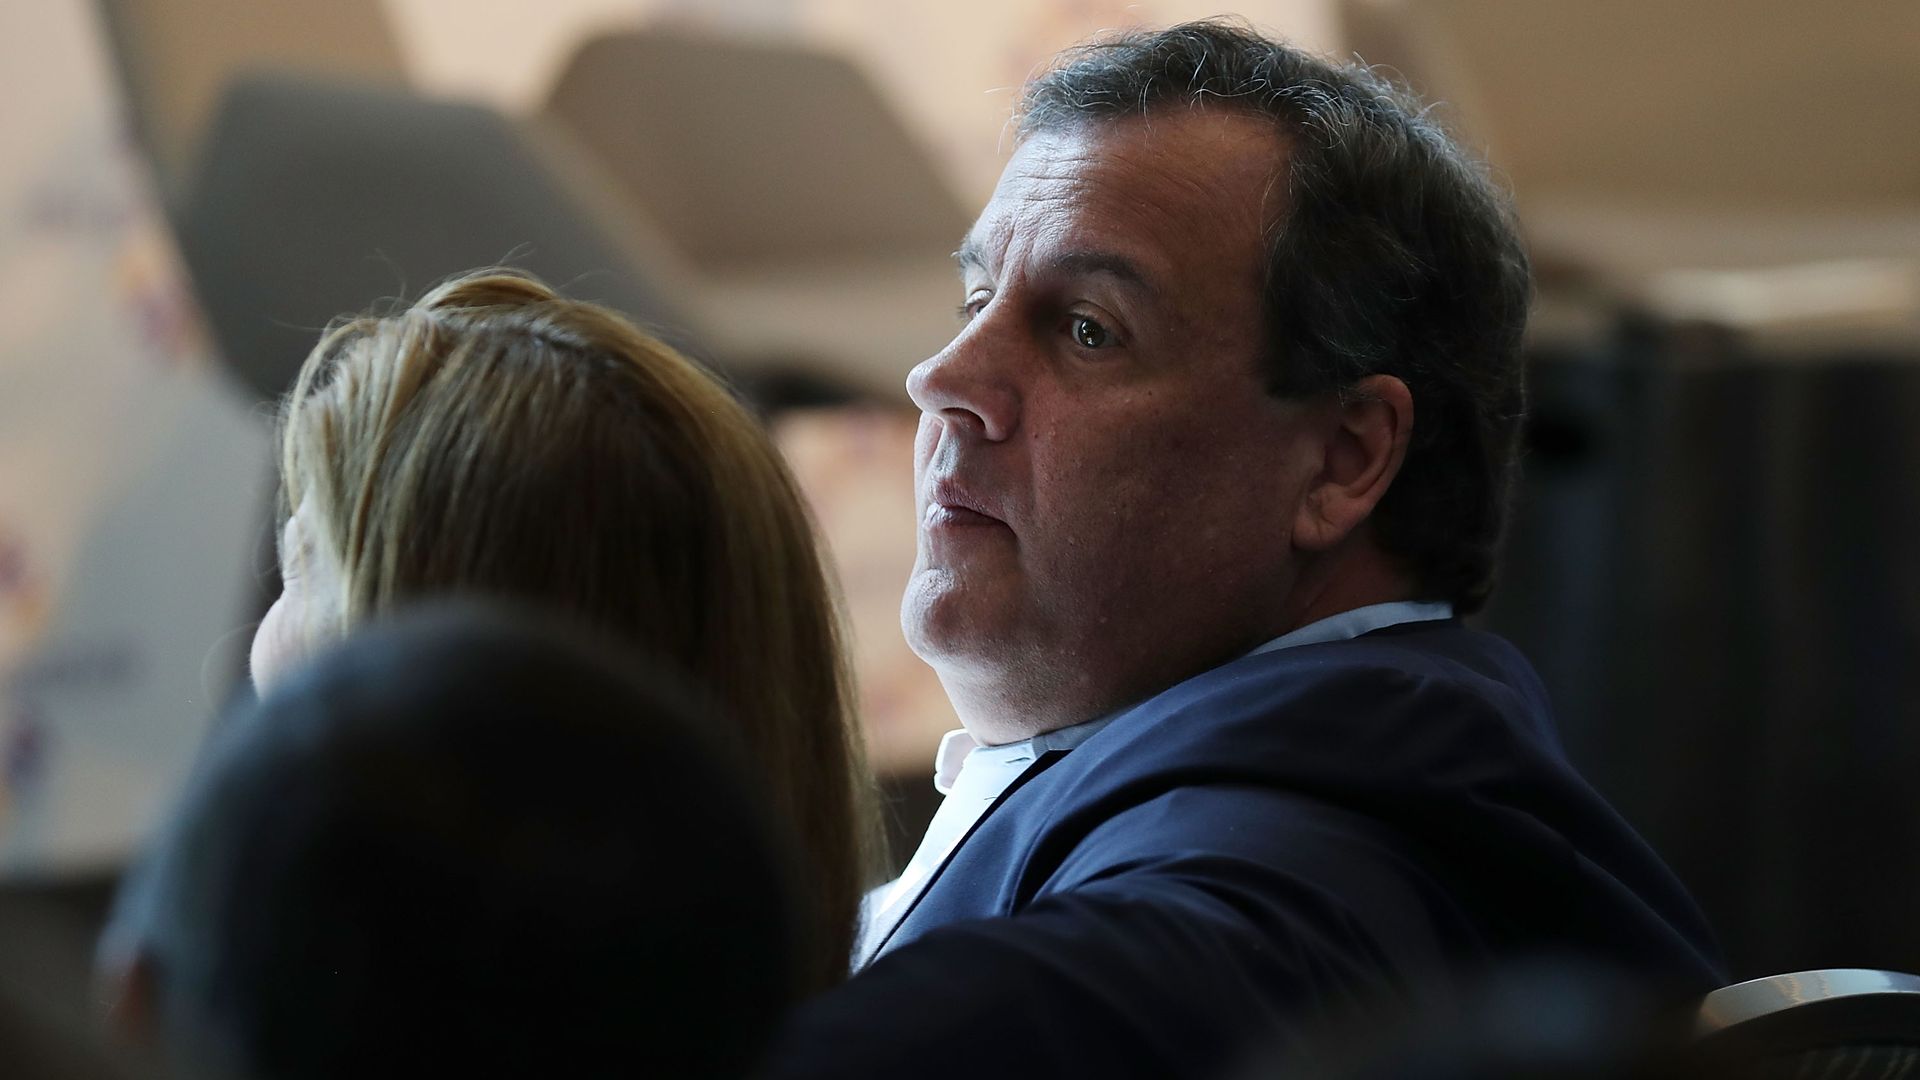 Former New Jersey Governor Chris Christie turns his head while seated